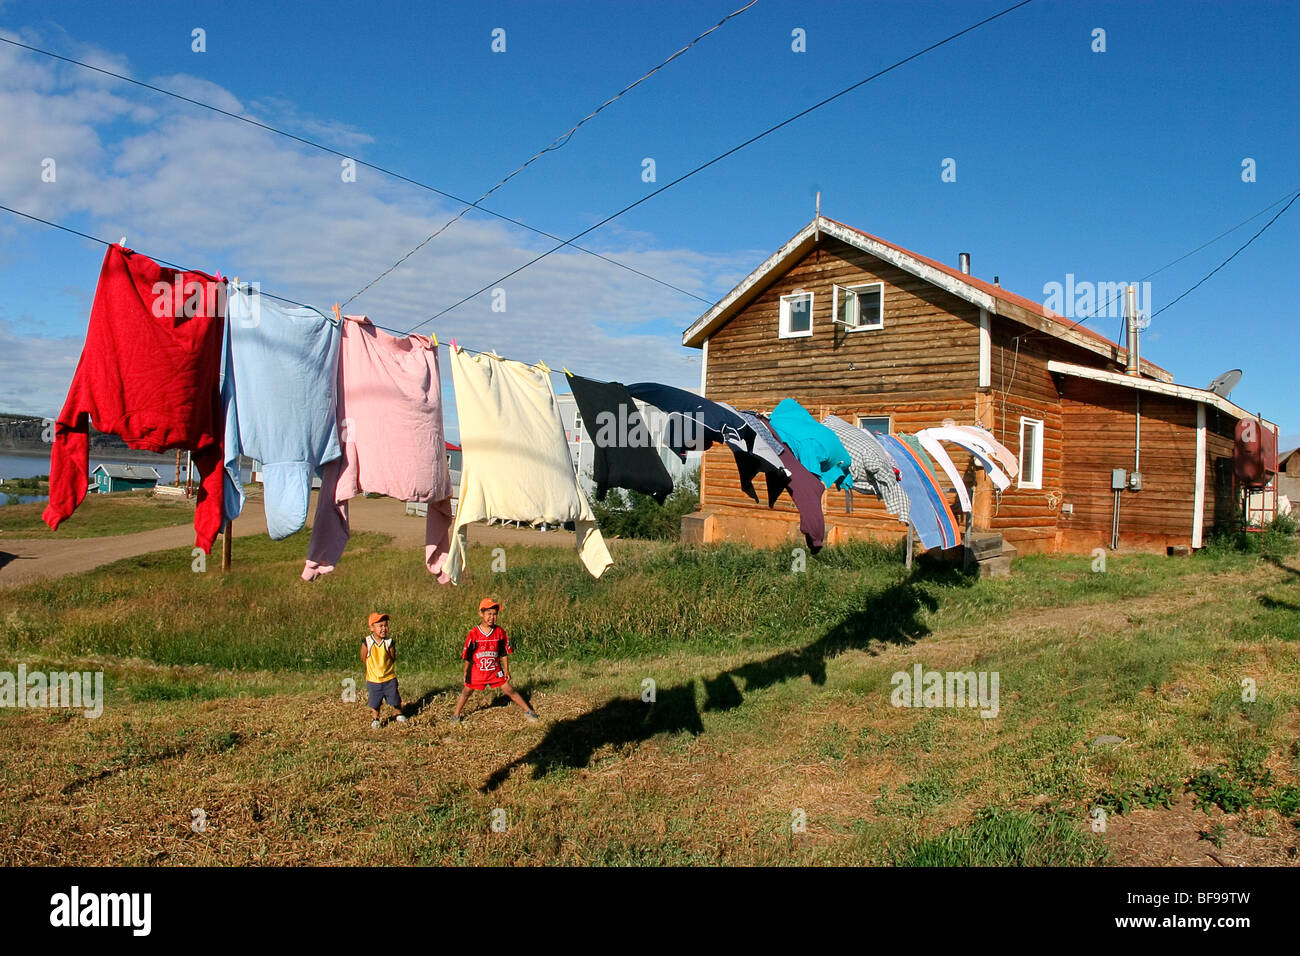 Children play in their yard while laundry dries on a line in Tsiigehtchic, village along Mackenzie River, NWT, Canada Stock Photo